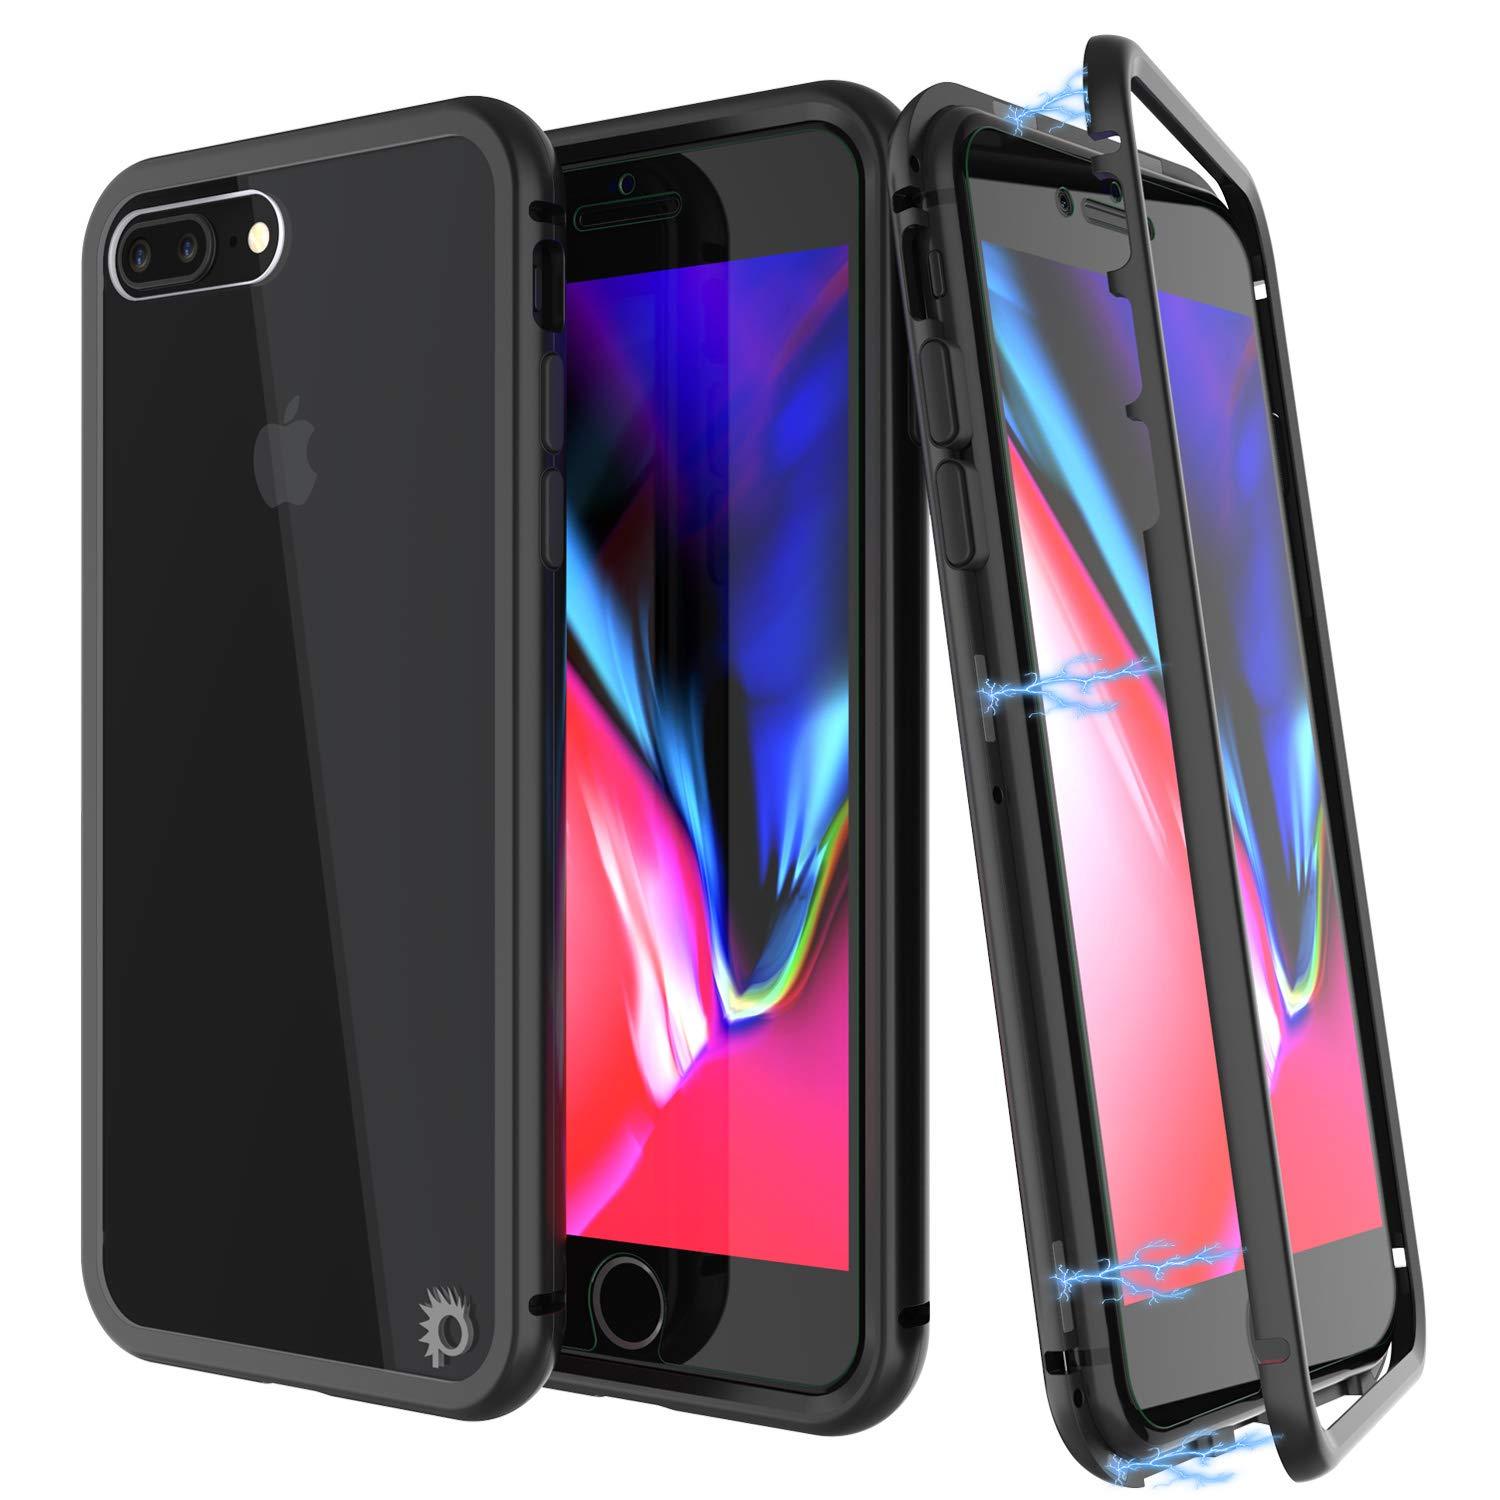 iPhone 8+ Plus Case, Punkcase Magnetix 2.0 Protective TPU Cover W/ Tempered Glass Screen Protector [Black]